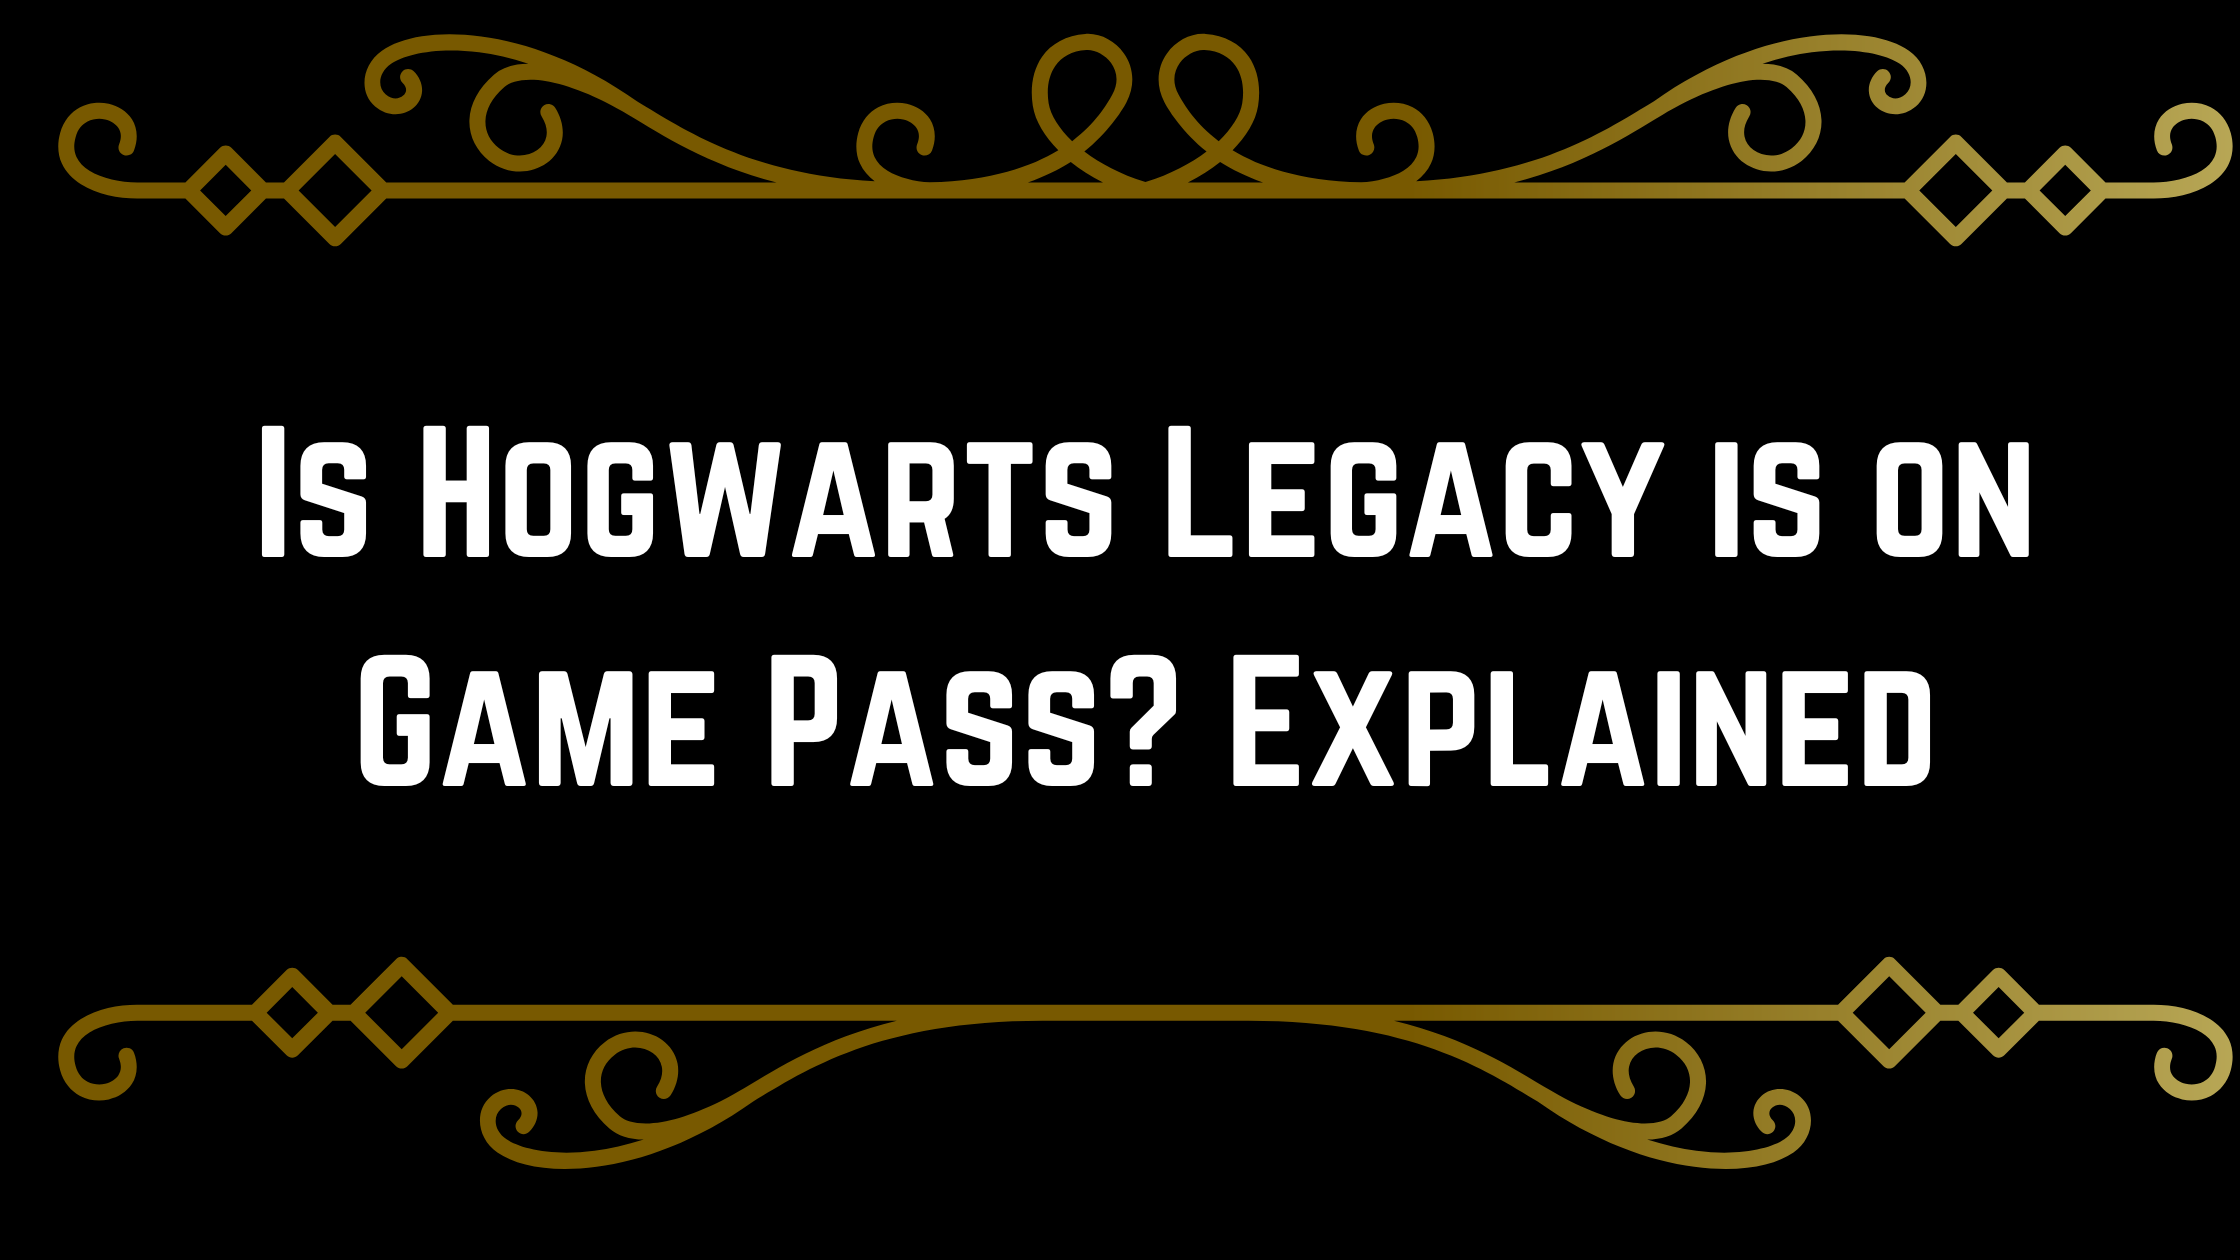 is hogwarts legacy on game pass